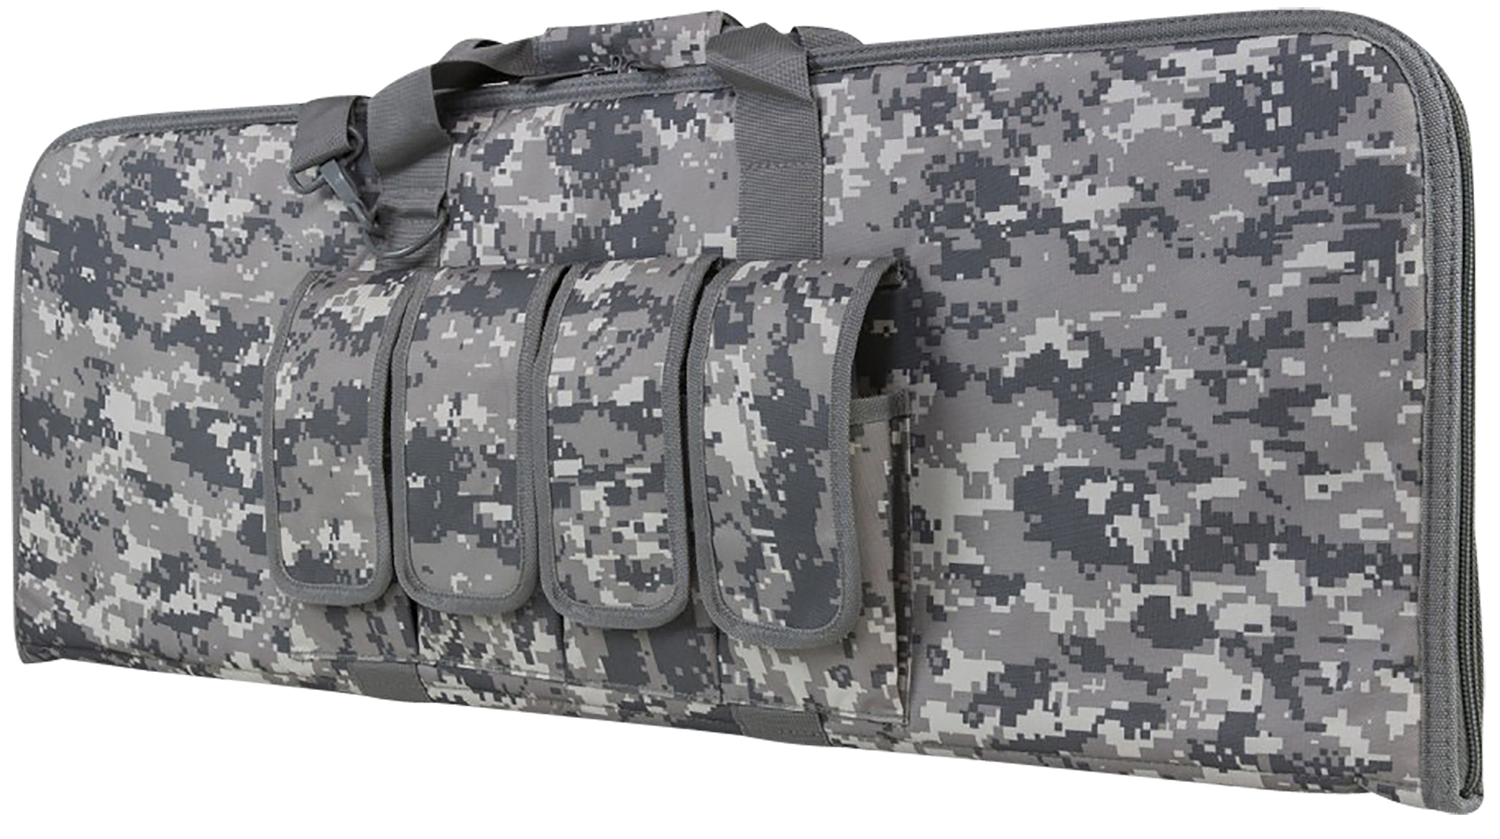 NcStar CVCP2960D36 2960 Carbine Case Digital Camouflage PVC Nylon with Lockable Zippers, Pockets & Padded Carry Handle 36